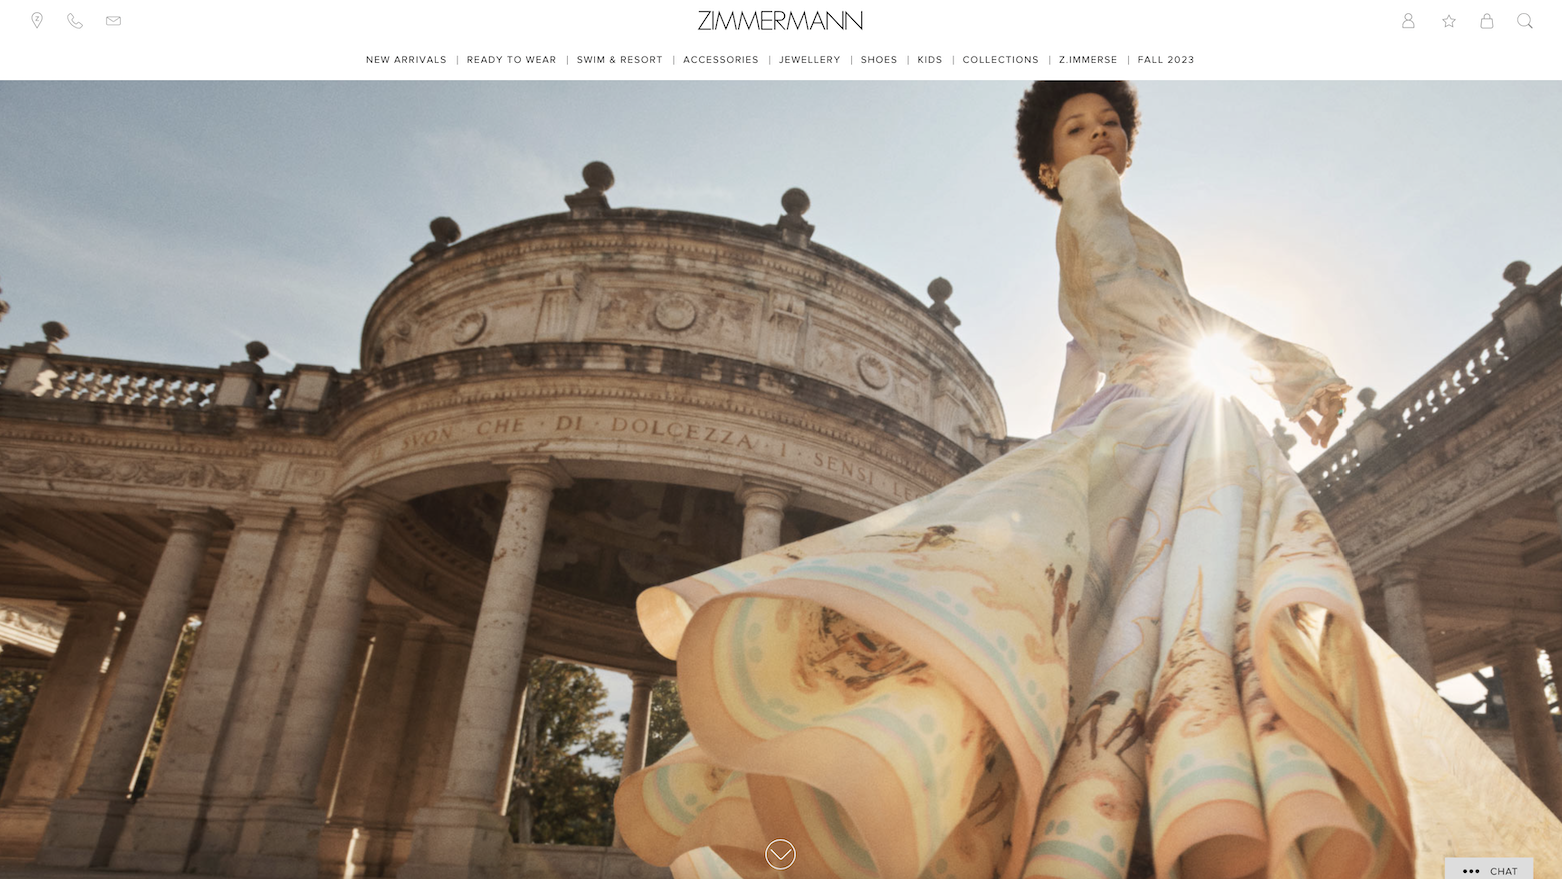 Rumor: Australian Designer Brand Zimmermann to Be Sold With a Possible Valuation of Aud 2 Billion